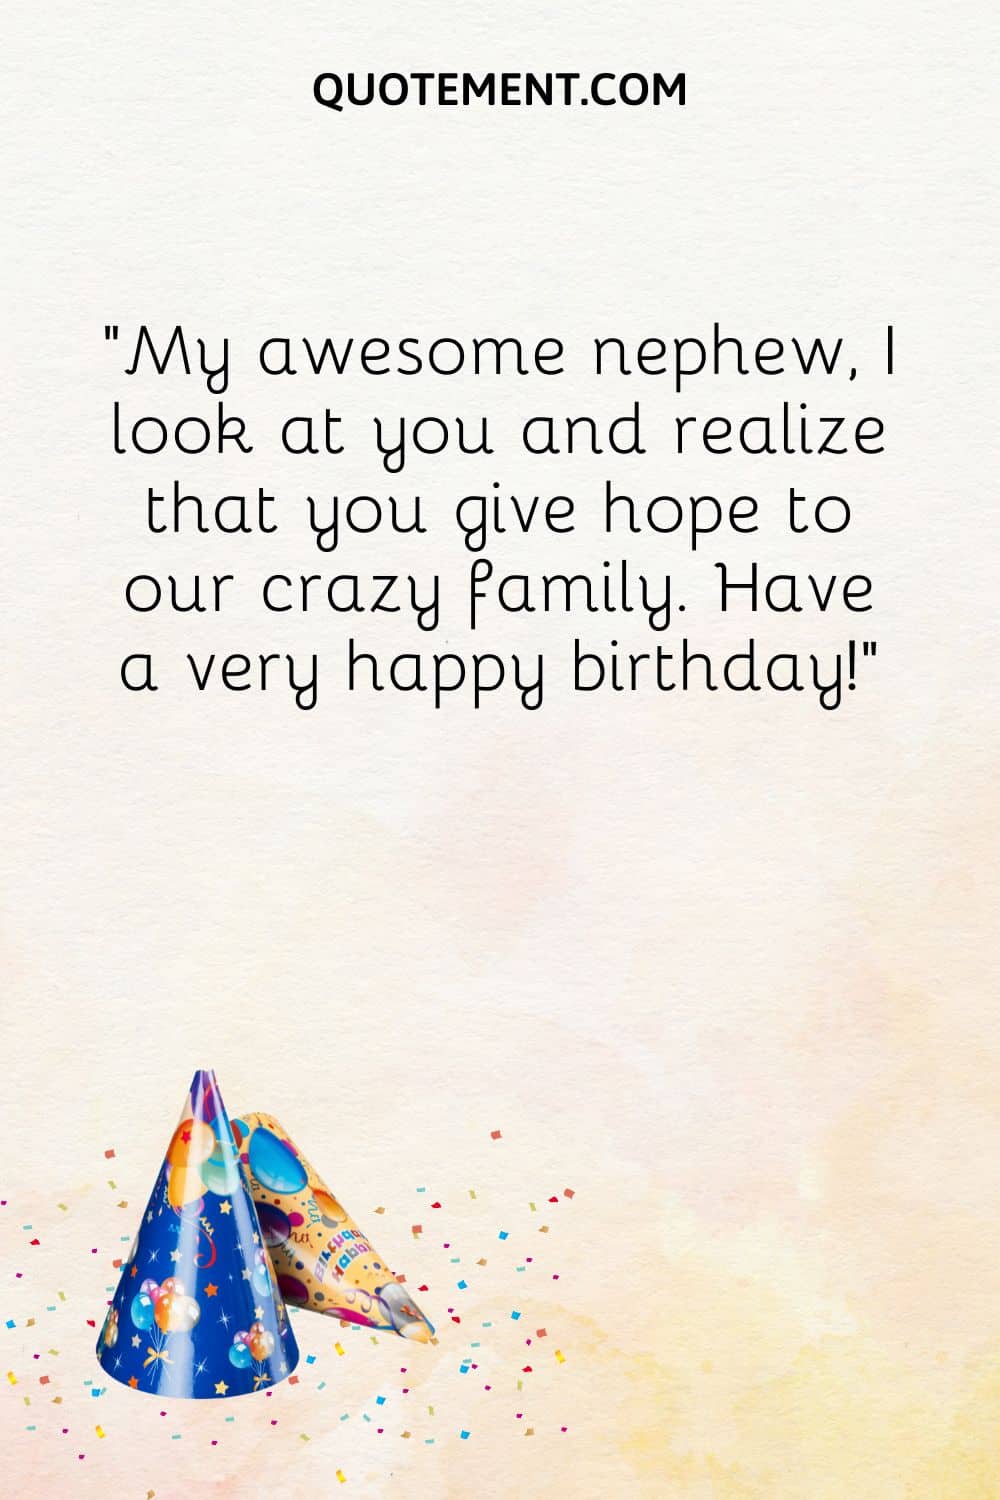 “My awesome nephew, I look at you and realize that you give hope to our crazy family. Have a very happy birthday!”